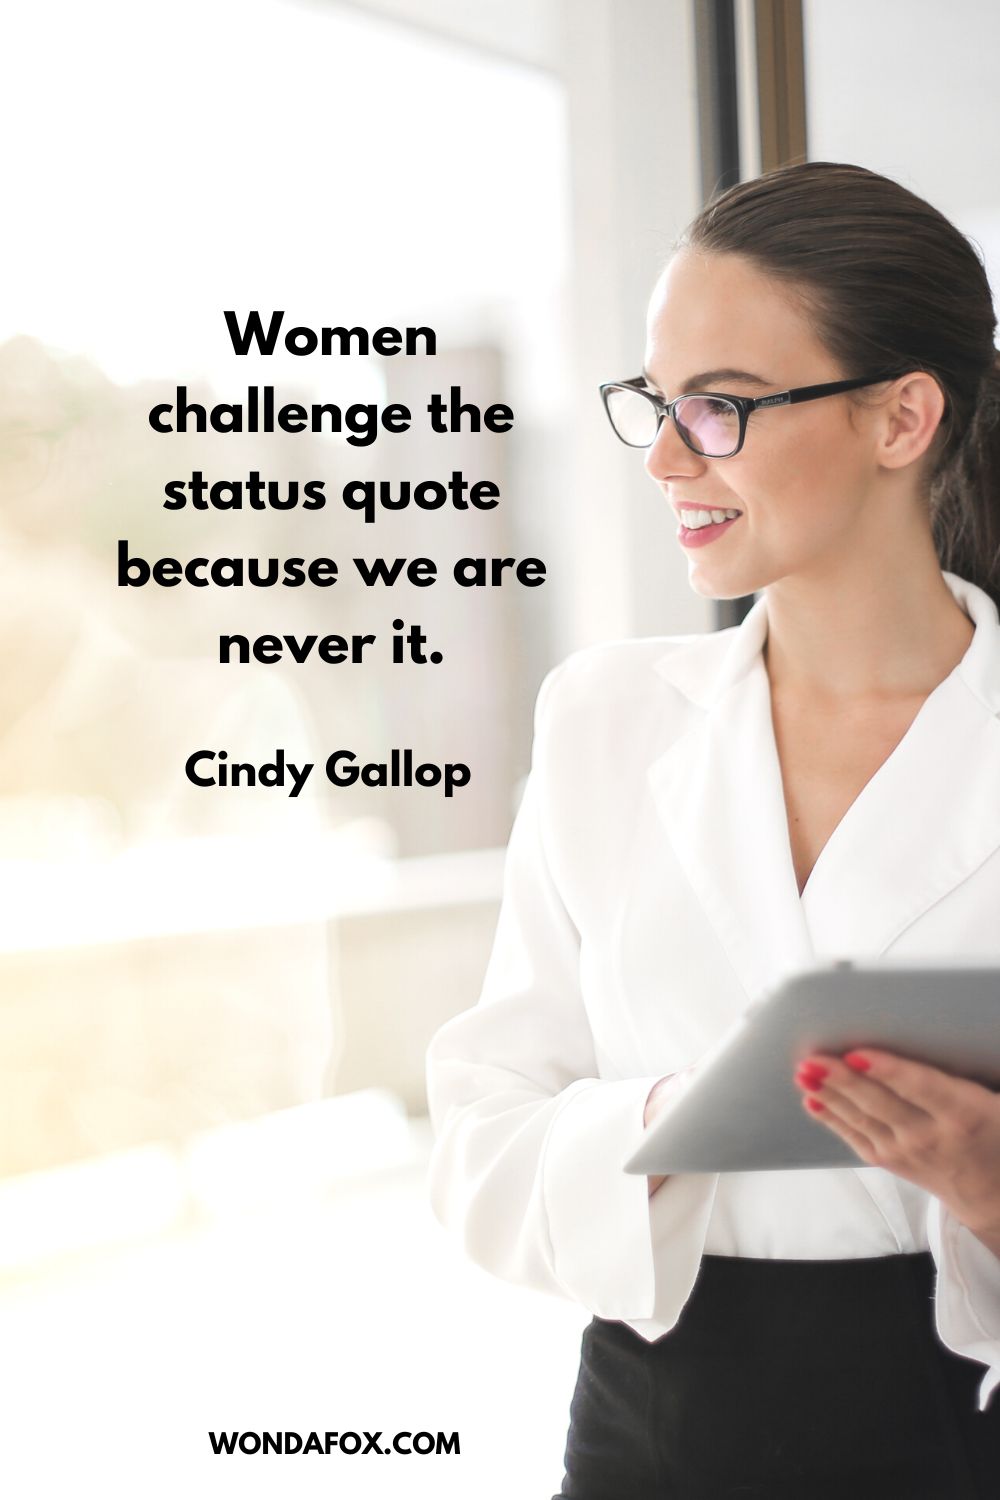 Women challenge the status quote because we are never it. Cindy Gallop